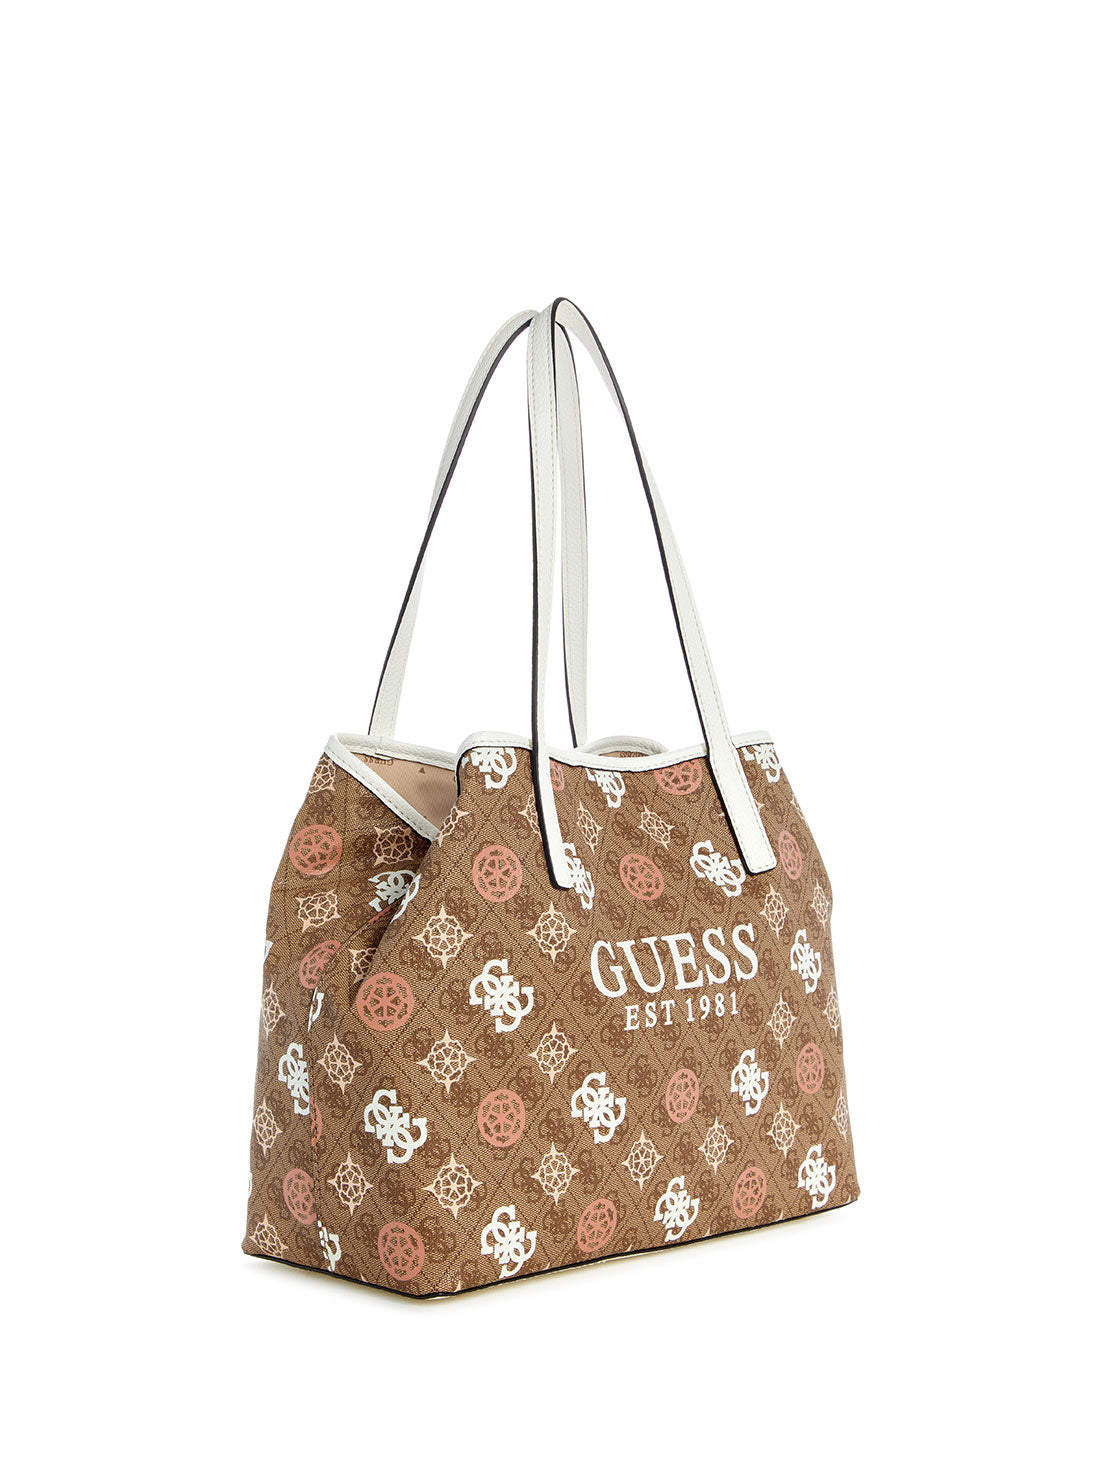 GUESS Beige Tan Logo Vikky 2 in 1 Tote Bag side view